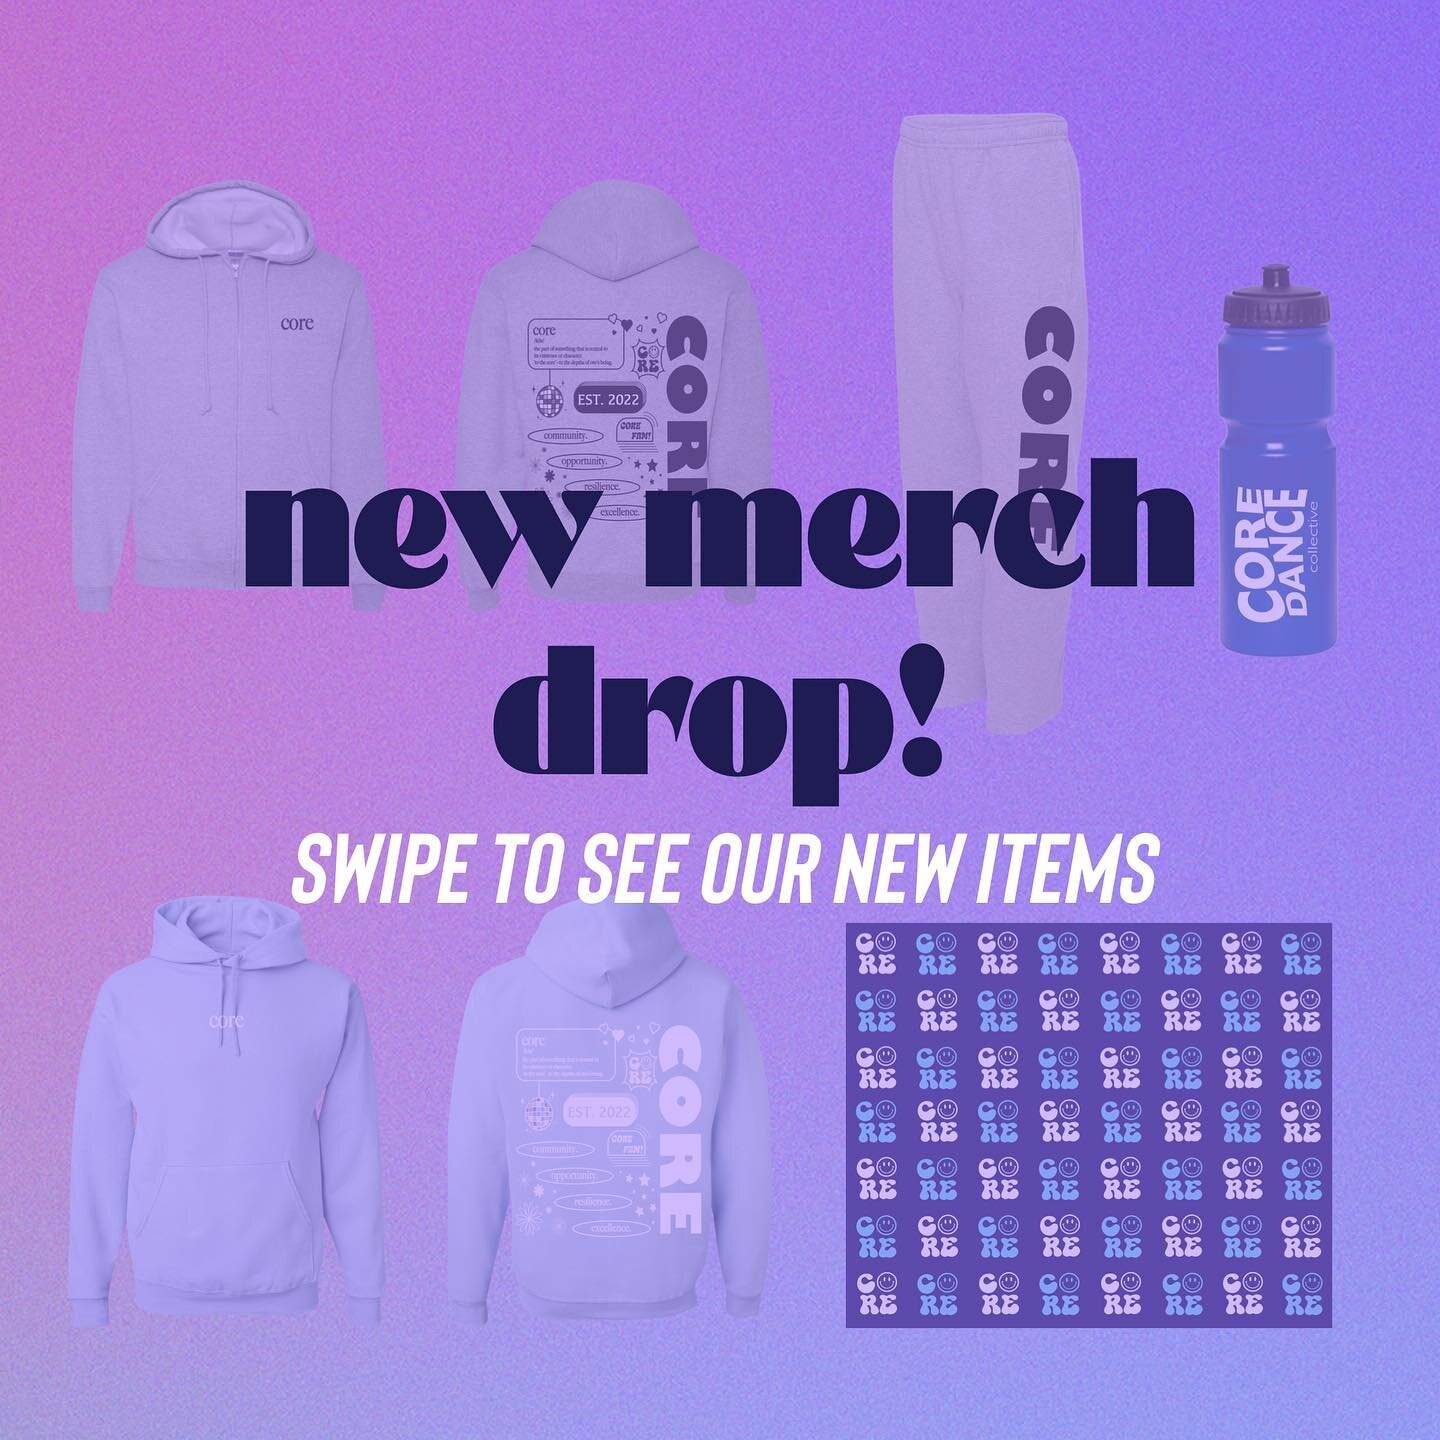 IT&rsquo;S MERCH TIME! 📢🙌🏻 We&rsquo;re so excited to launch these new items 🤍 Order form is linked in our bio &amp; will only be open until next Wednesday, February 14th, so be sure to get yours in ASAP so you don&rsquo;t miss out on this awesome